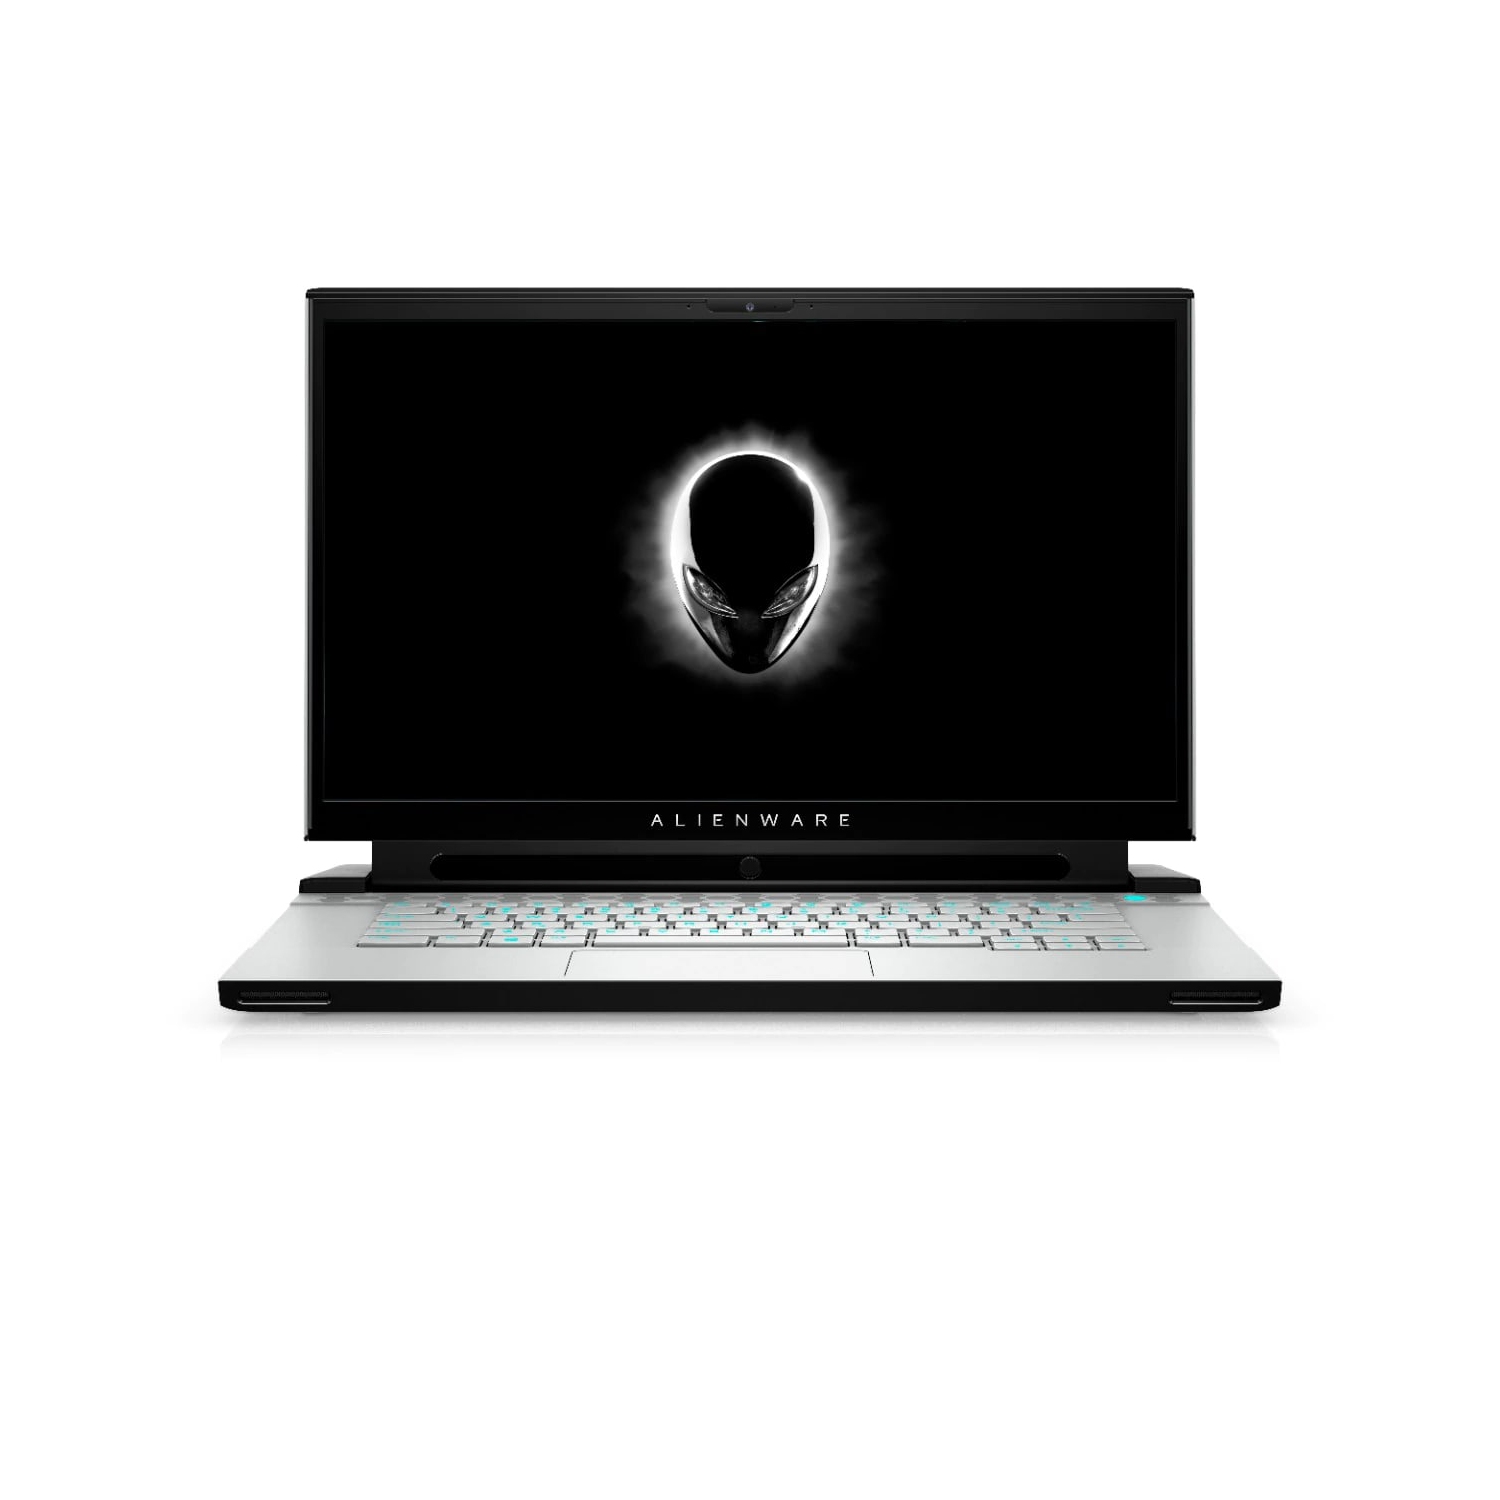 Refurbished (Excellent) - Dell Alienware m15 R3 Gaming Laptop (2020), 15.6" FHD, Core i7 - 512GB SSD + 512GB SSD - 32GB RAM - 2070 Super, 5 GHz - 10th Gen CPU Certified